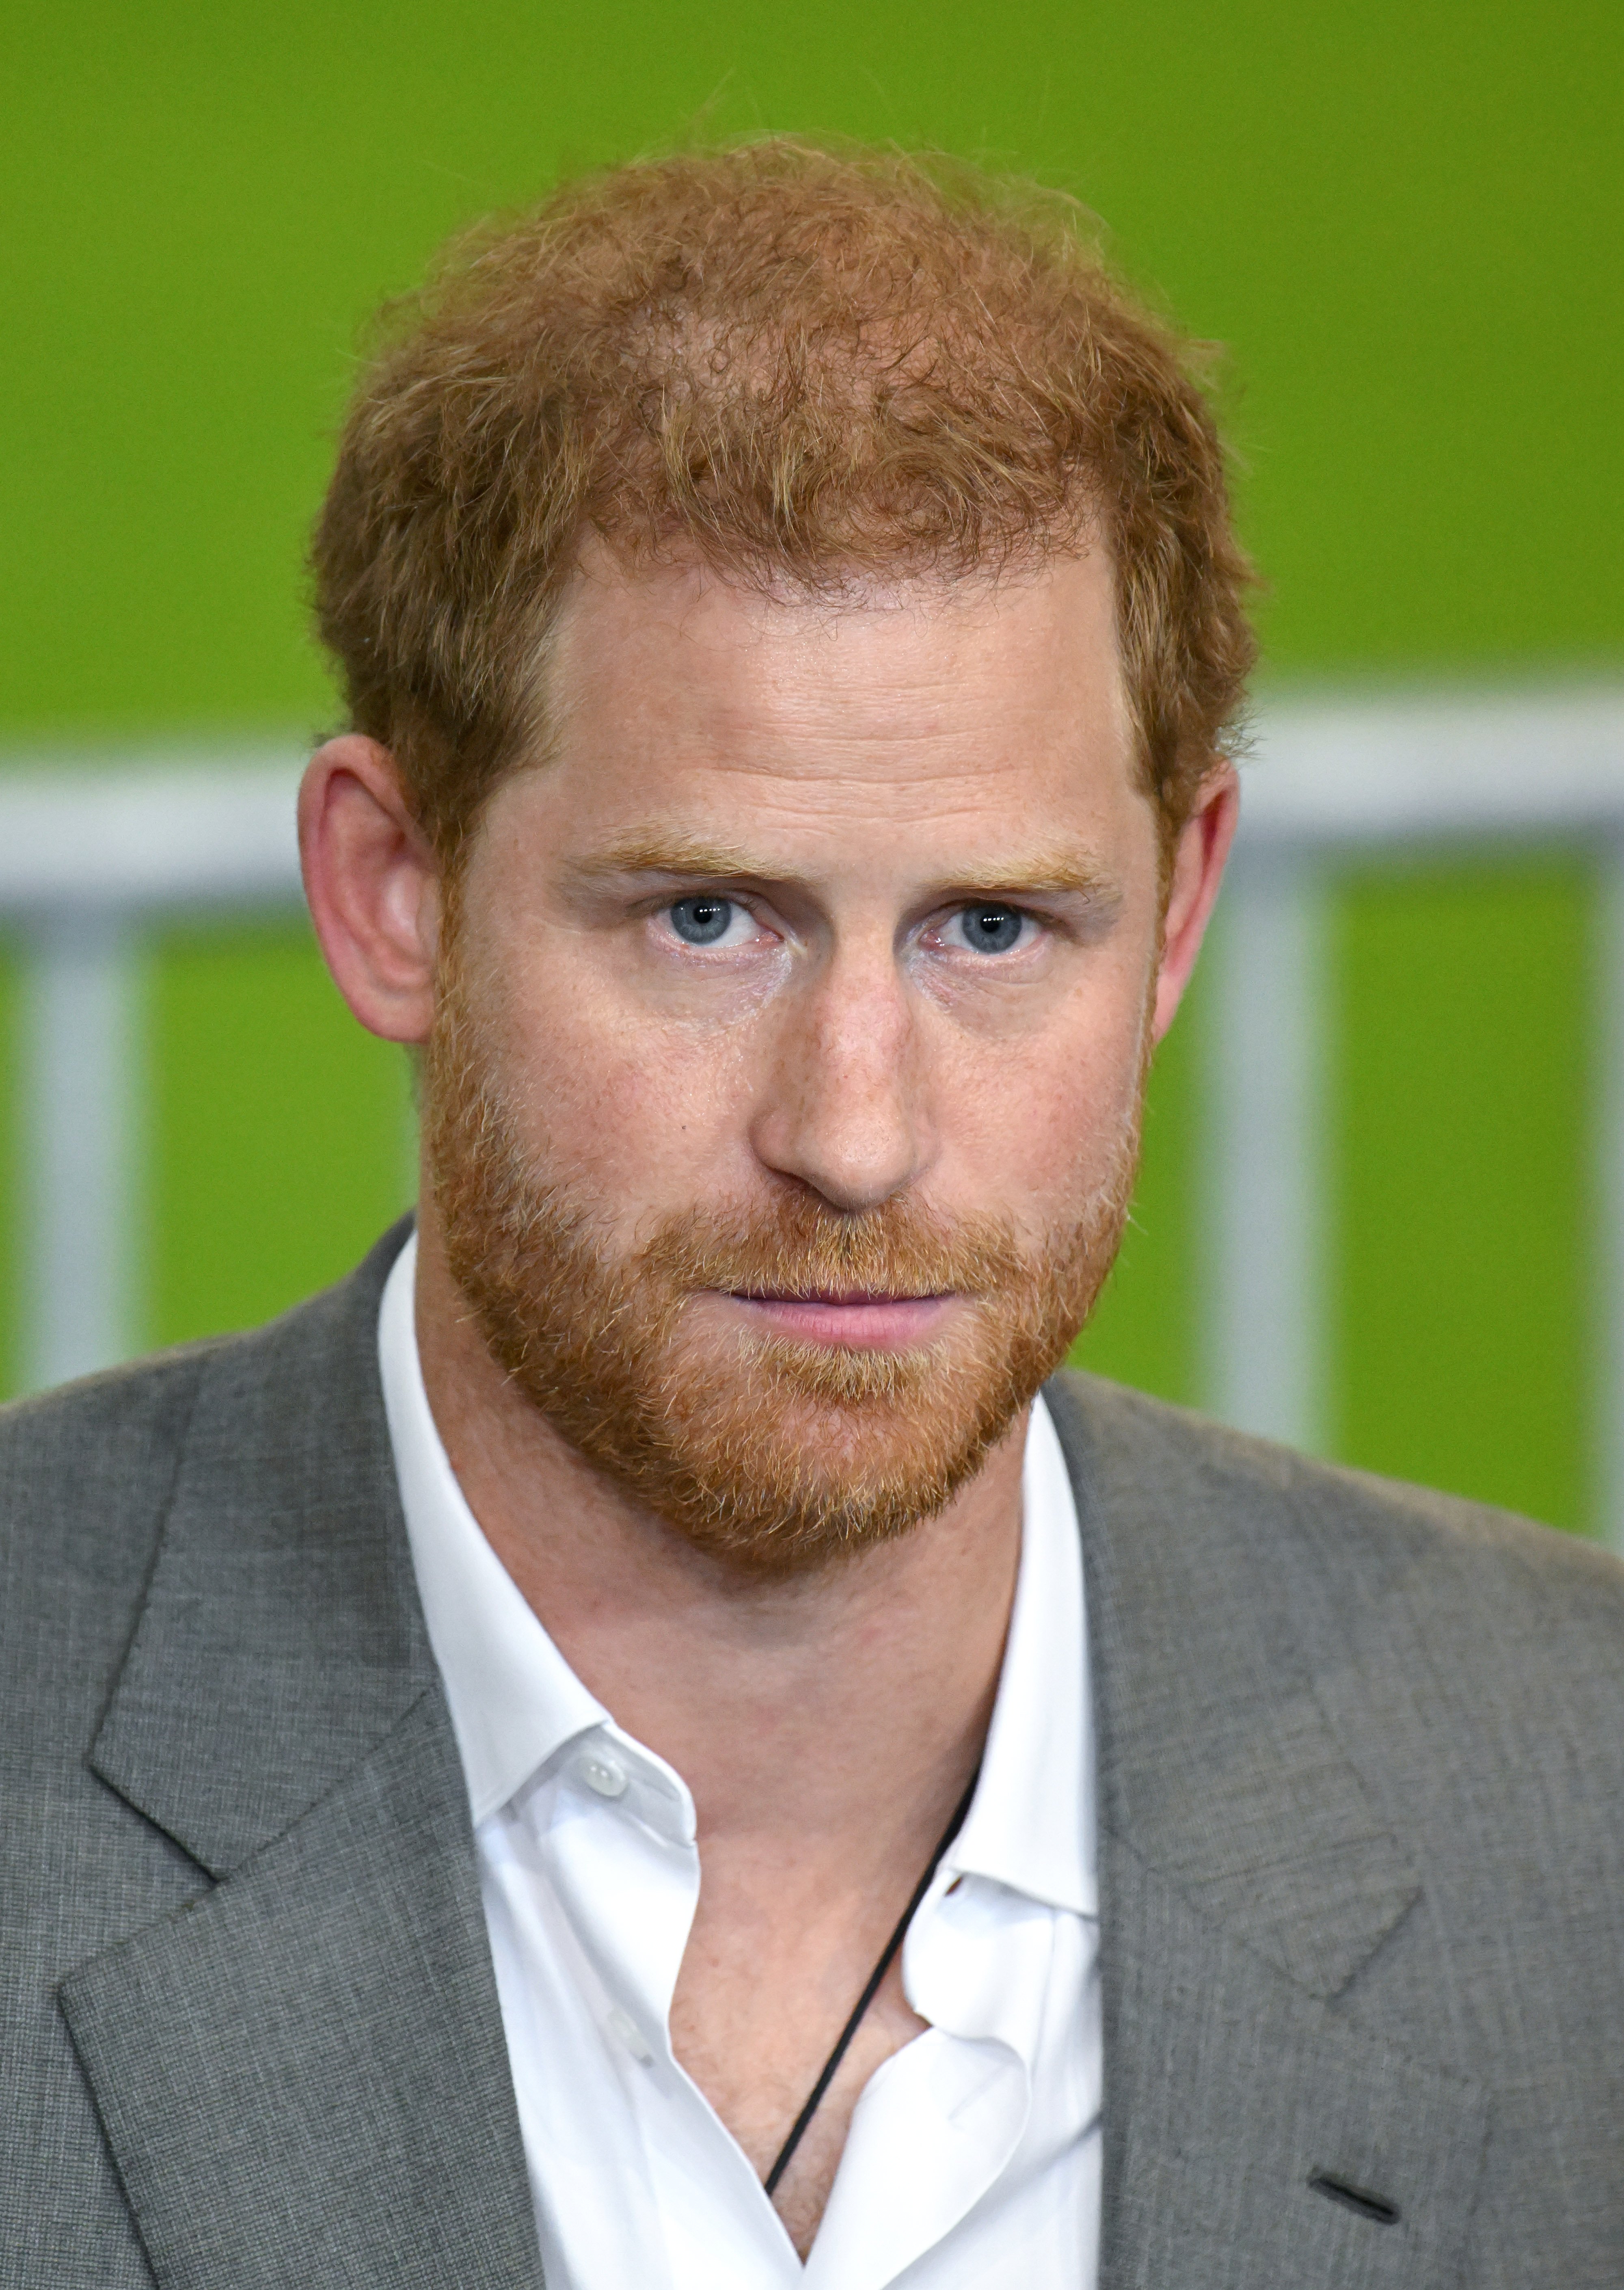 Prince Harry at a press conference at the Merkur Spiel Arena during the Invictus Games Dusseldorf 2023 - One Year To Go launch event on September 6, 2022, in Dusseldorf, Germany | Source: Getty Images